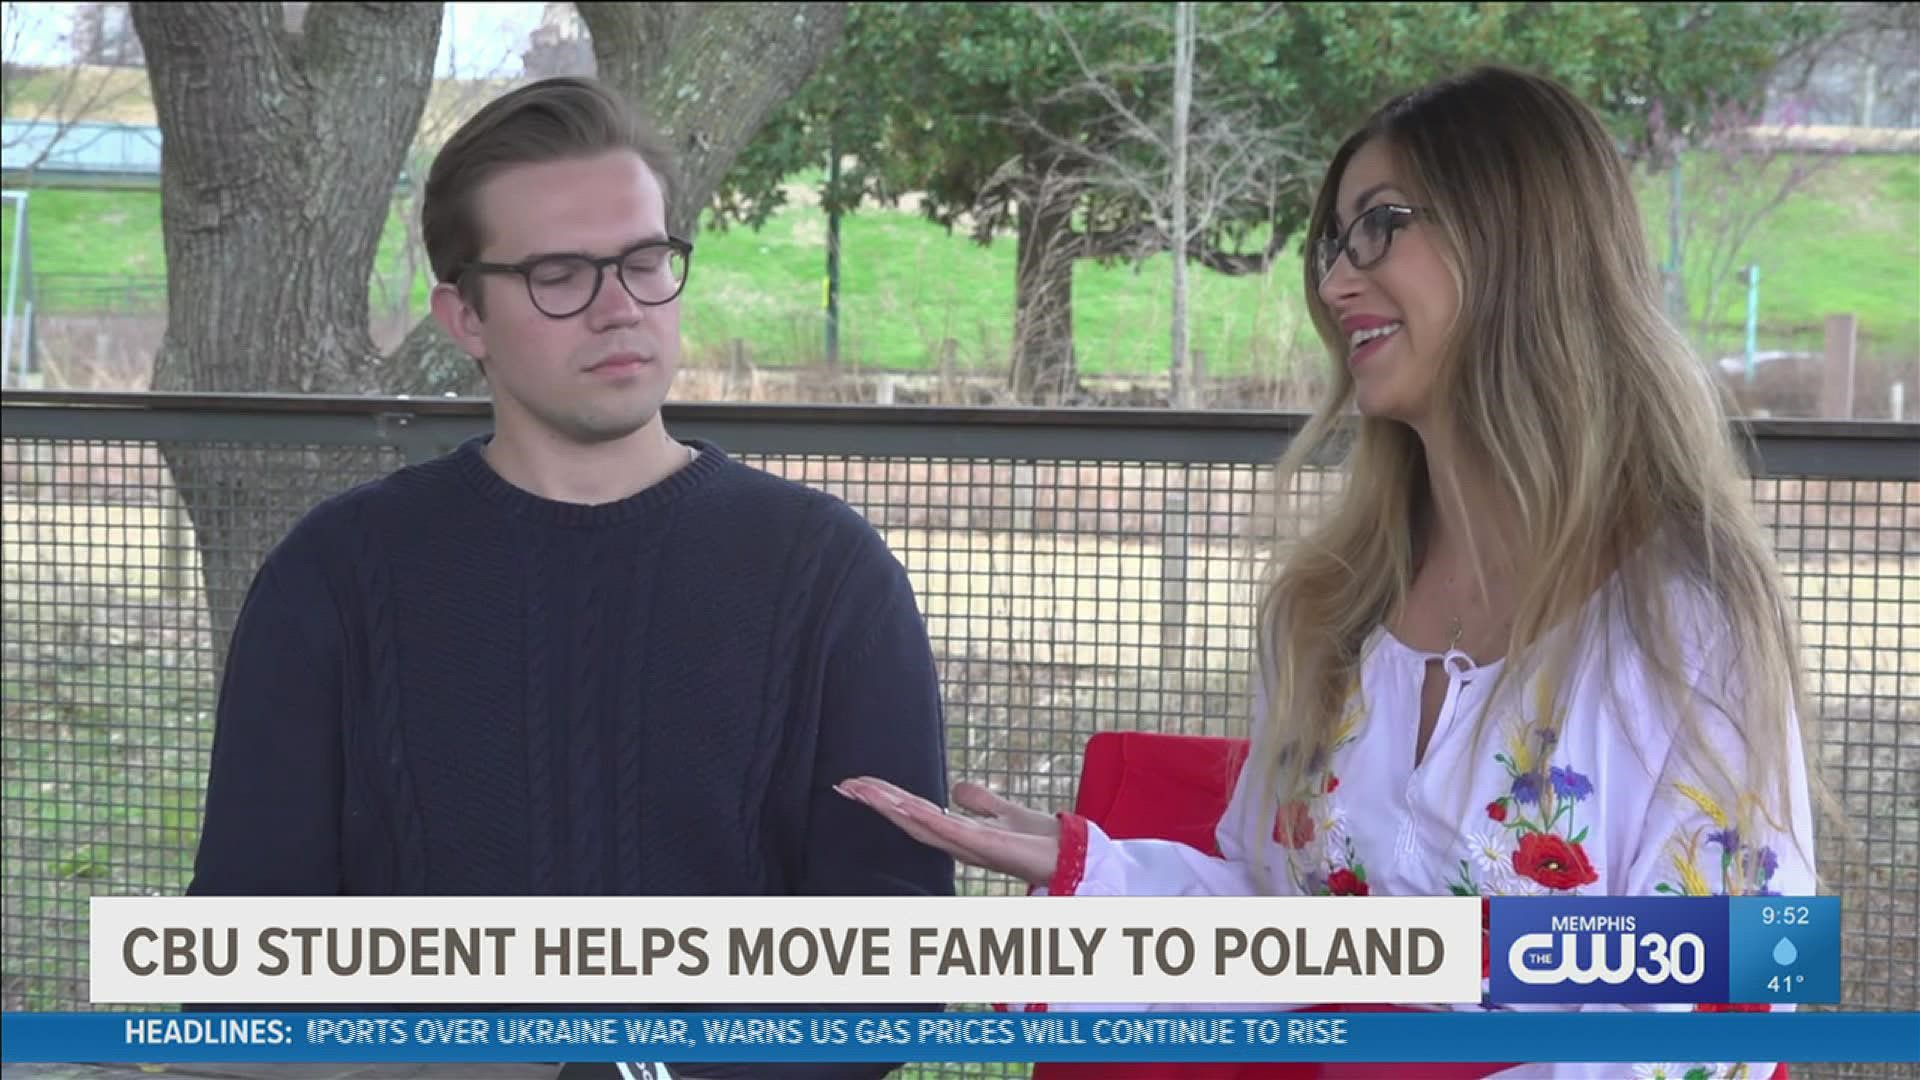 Oksana Piven’s family was lucky to flee alive with the help of a new friend she met just two weeks before the invasion.